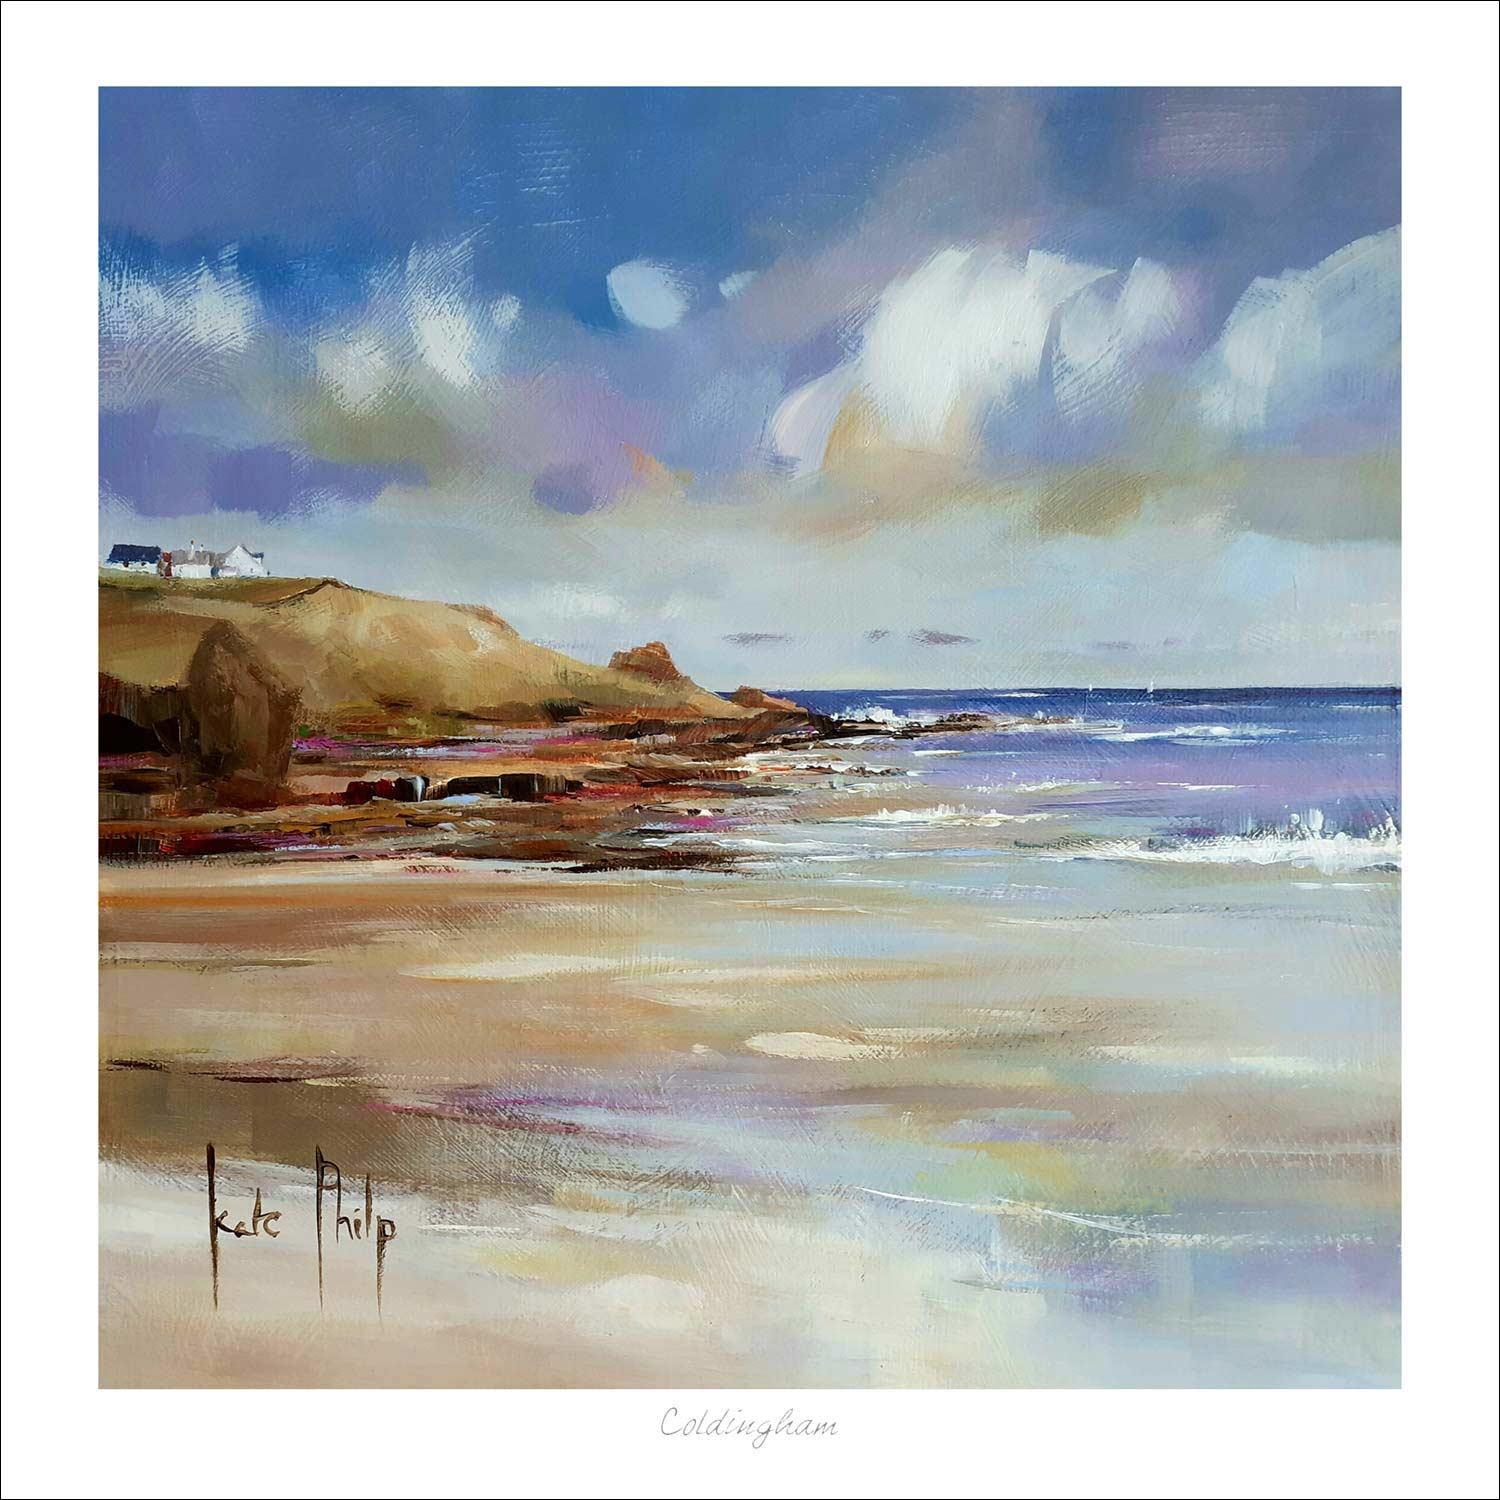 Coldingham Art Print from an original painting by artist Kate Philp